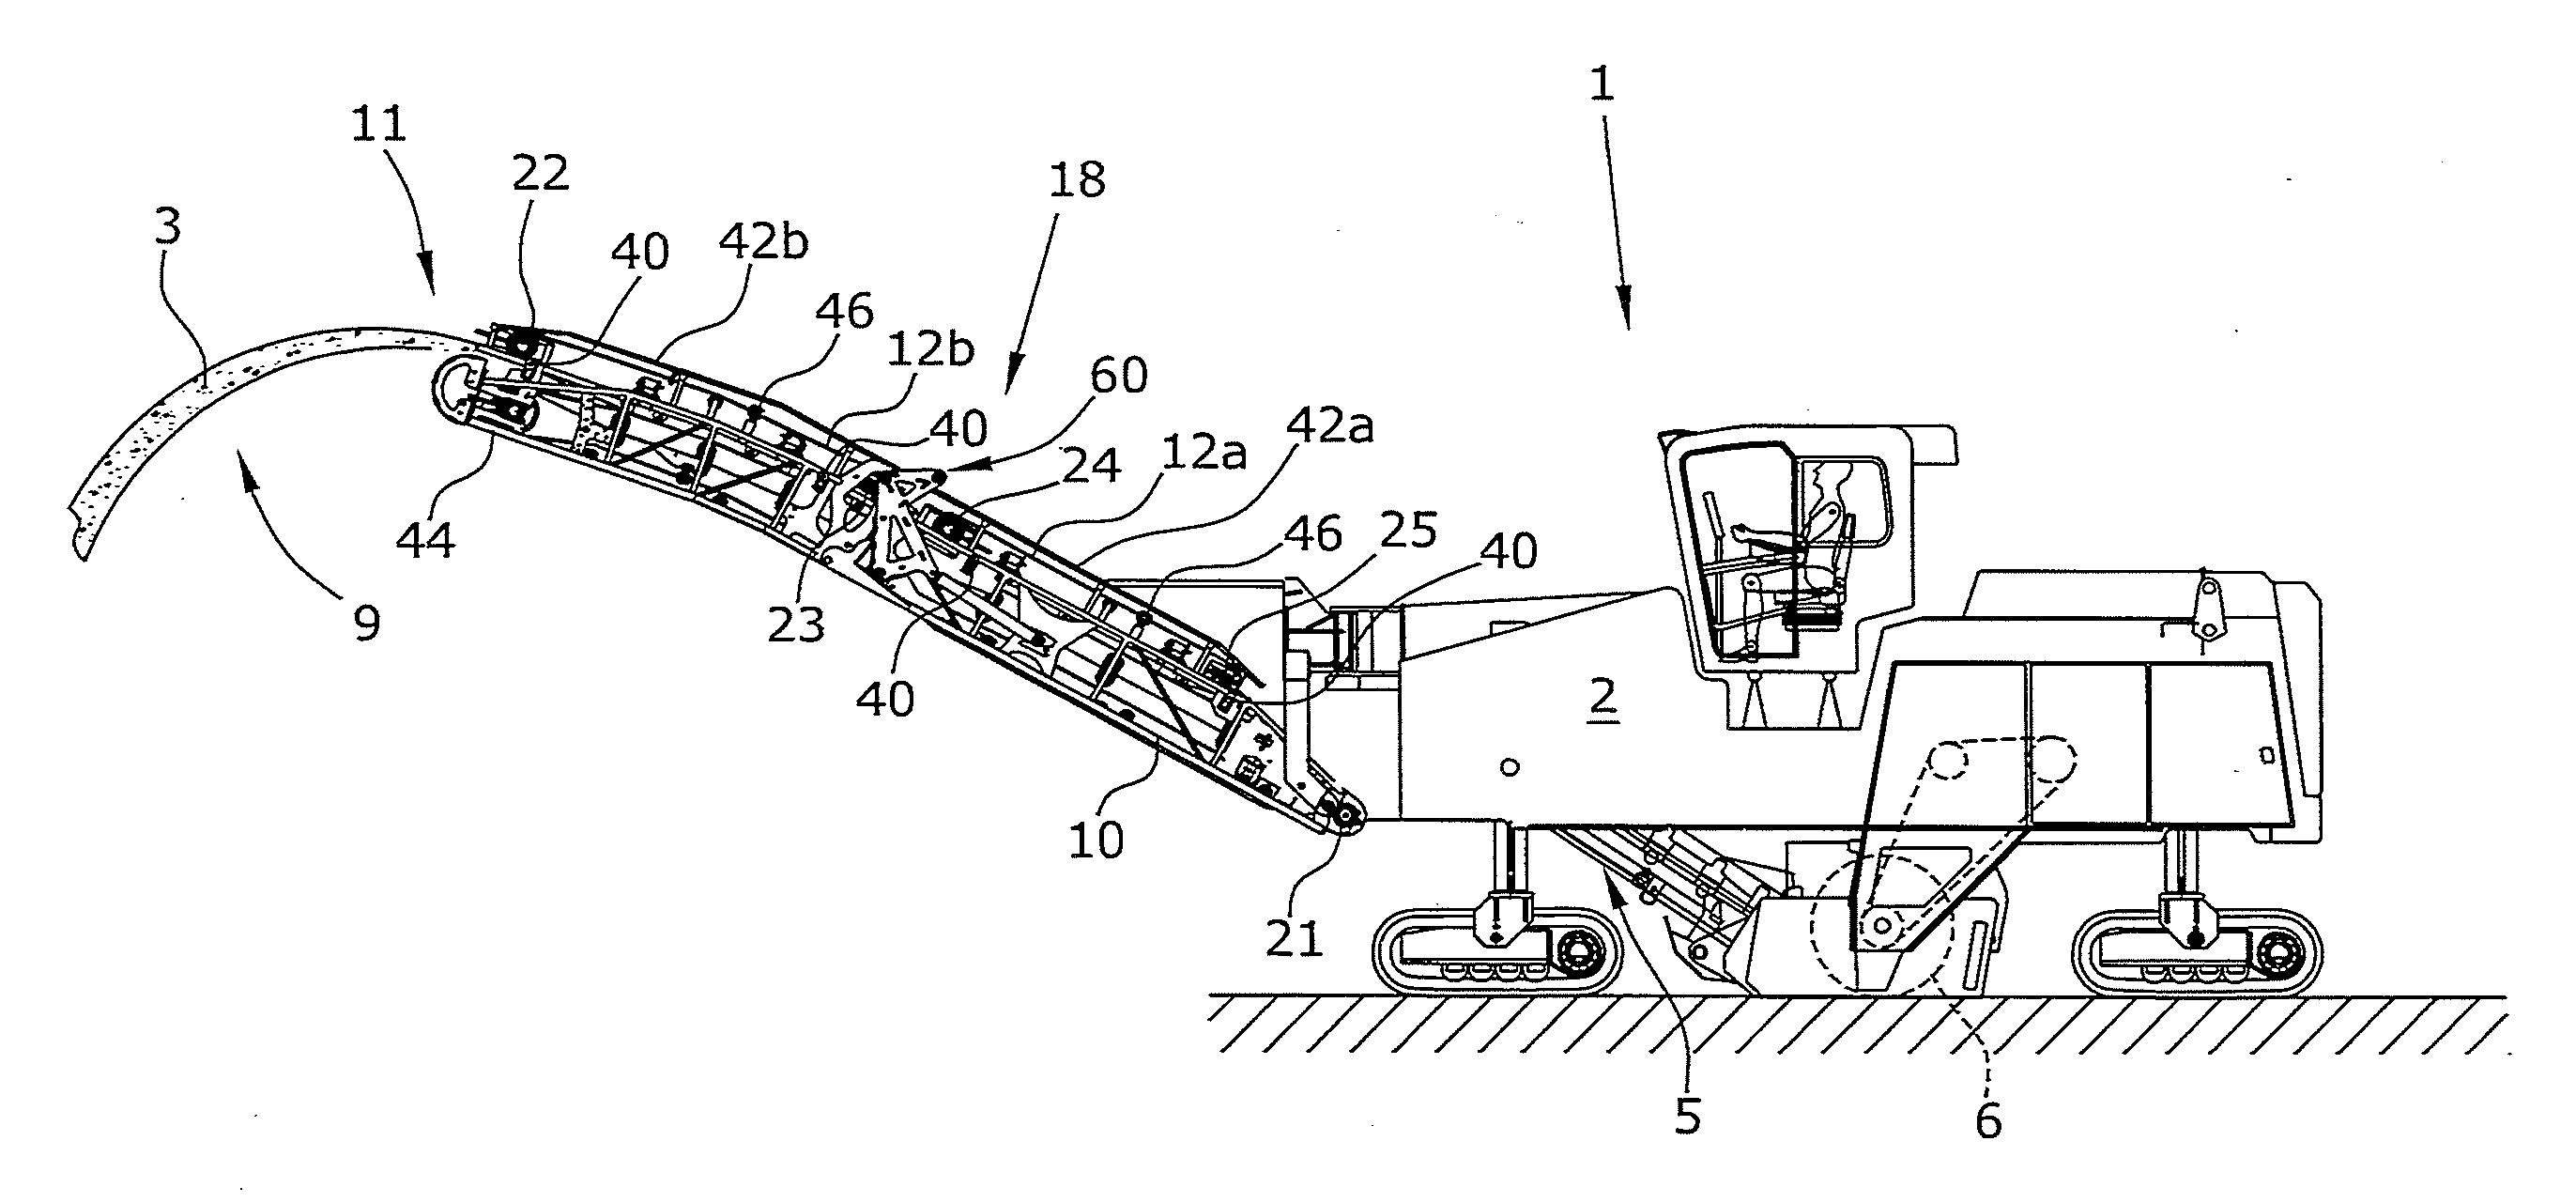 Construction Machine, As Well As Method For Milling Off And Transporting Away A Milled-Off Stream Of Material Of A Construction Machine